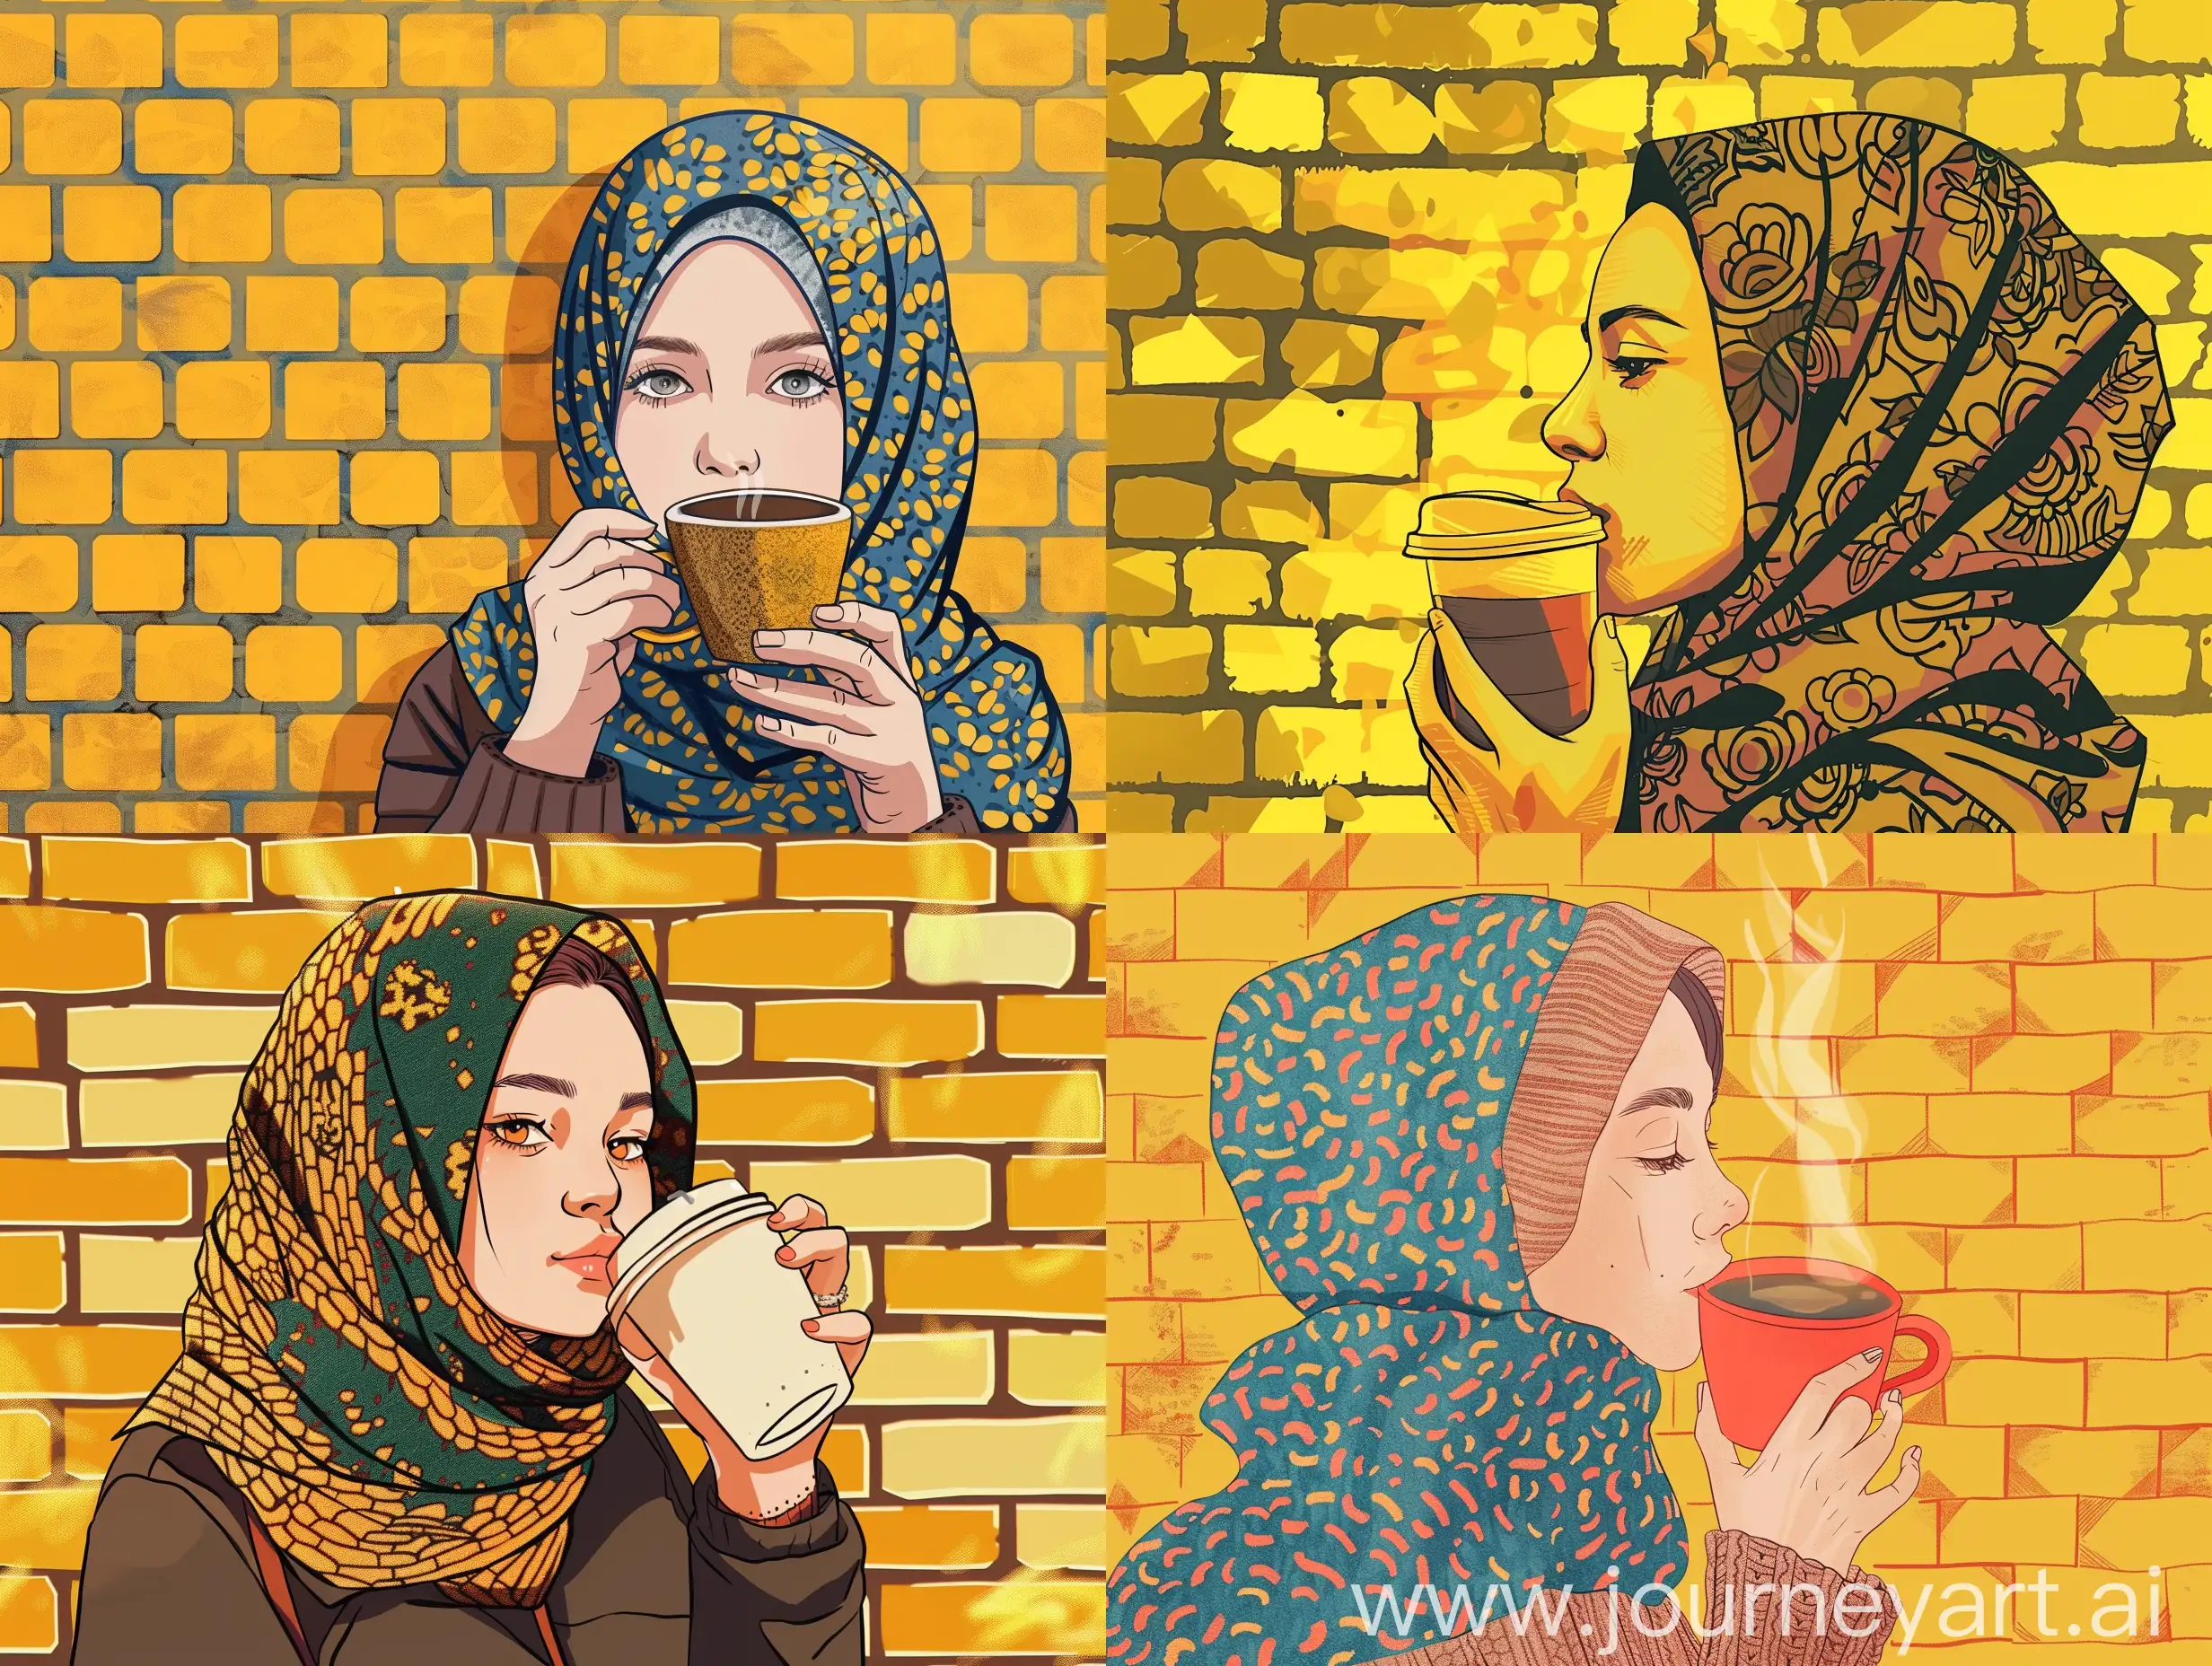 Girl-with-Headscarf-Drinking-Coffee-Against-Yellow-Brick-Background